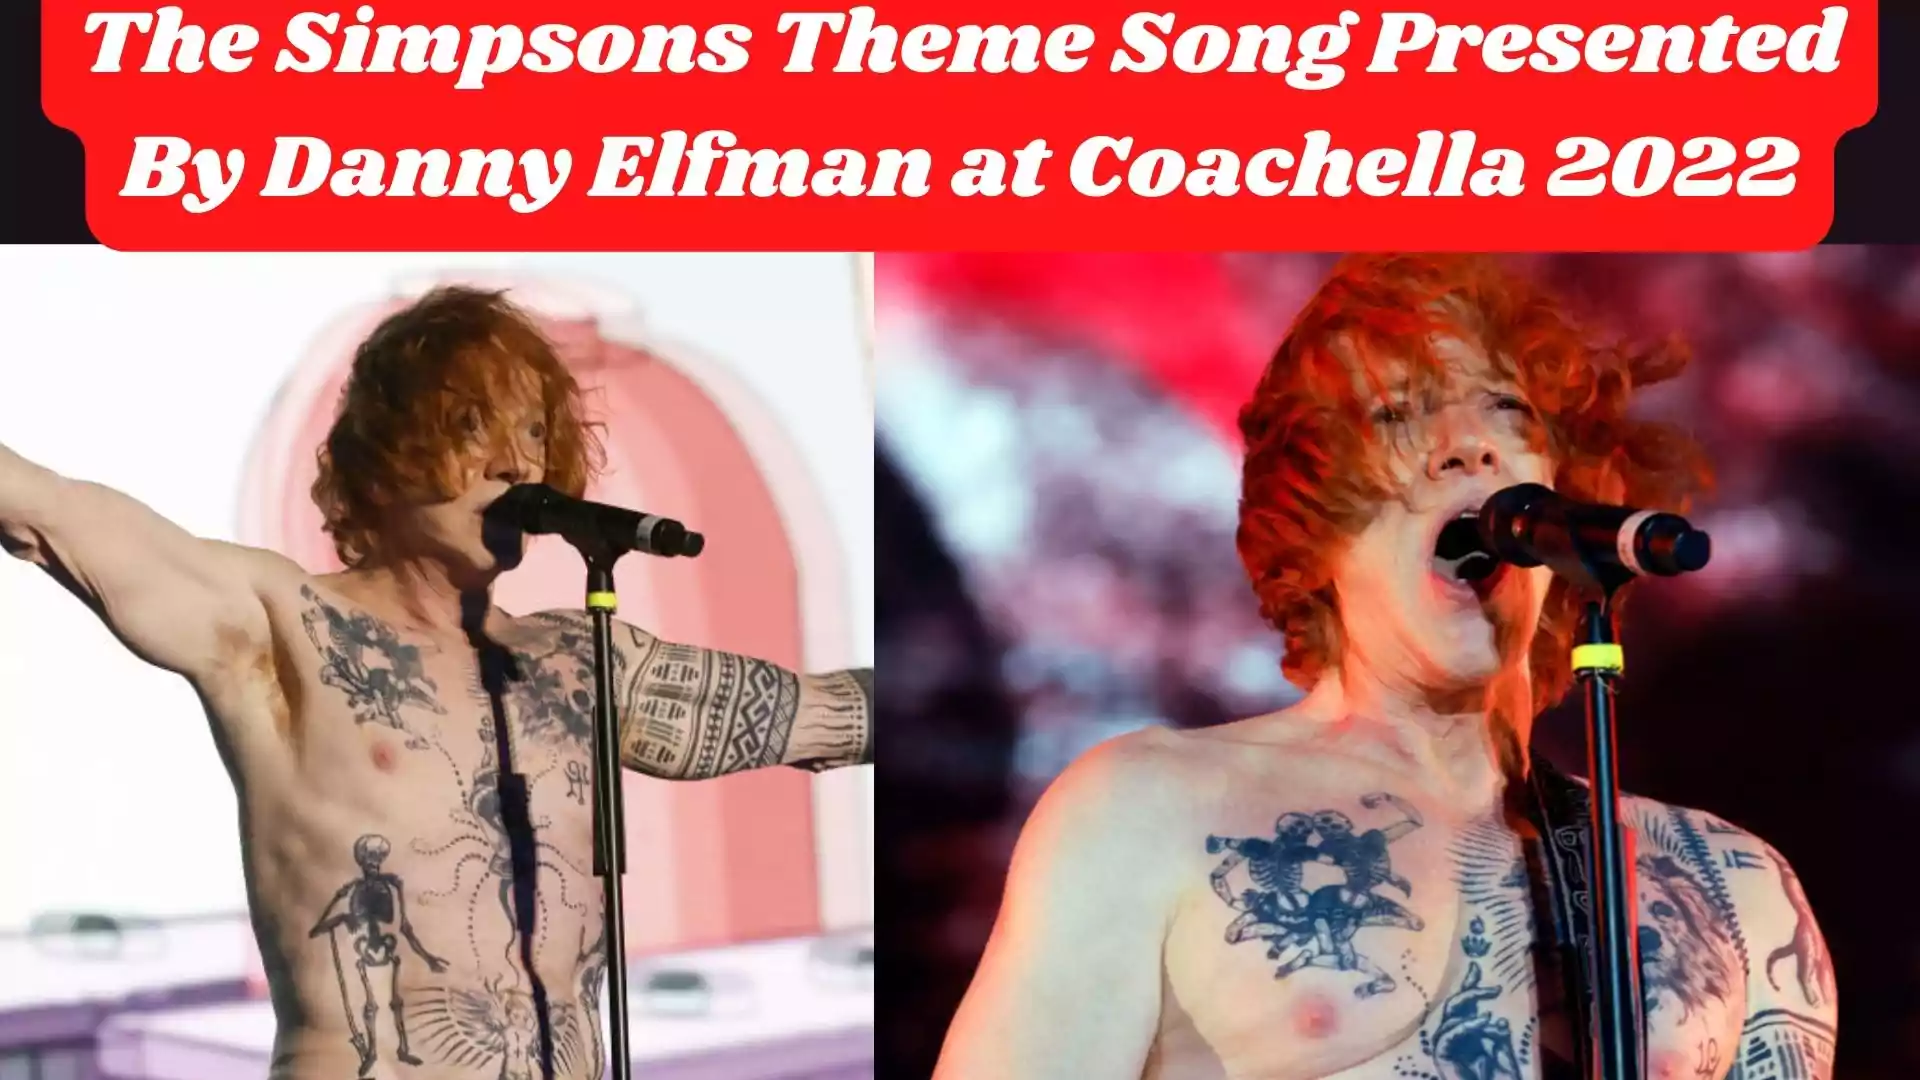 The Simpsons Theme Song Presented By Danny Elfman at Coachella 2022 wallpaper and images